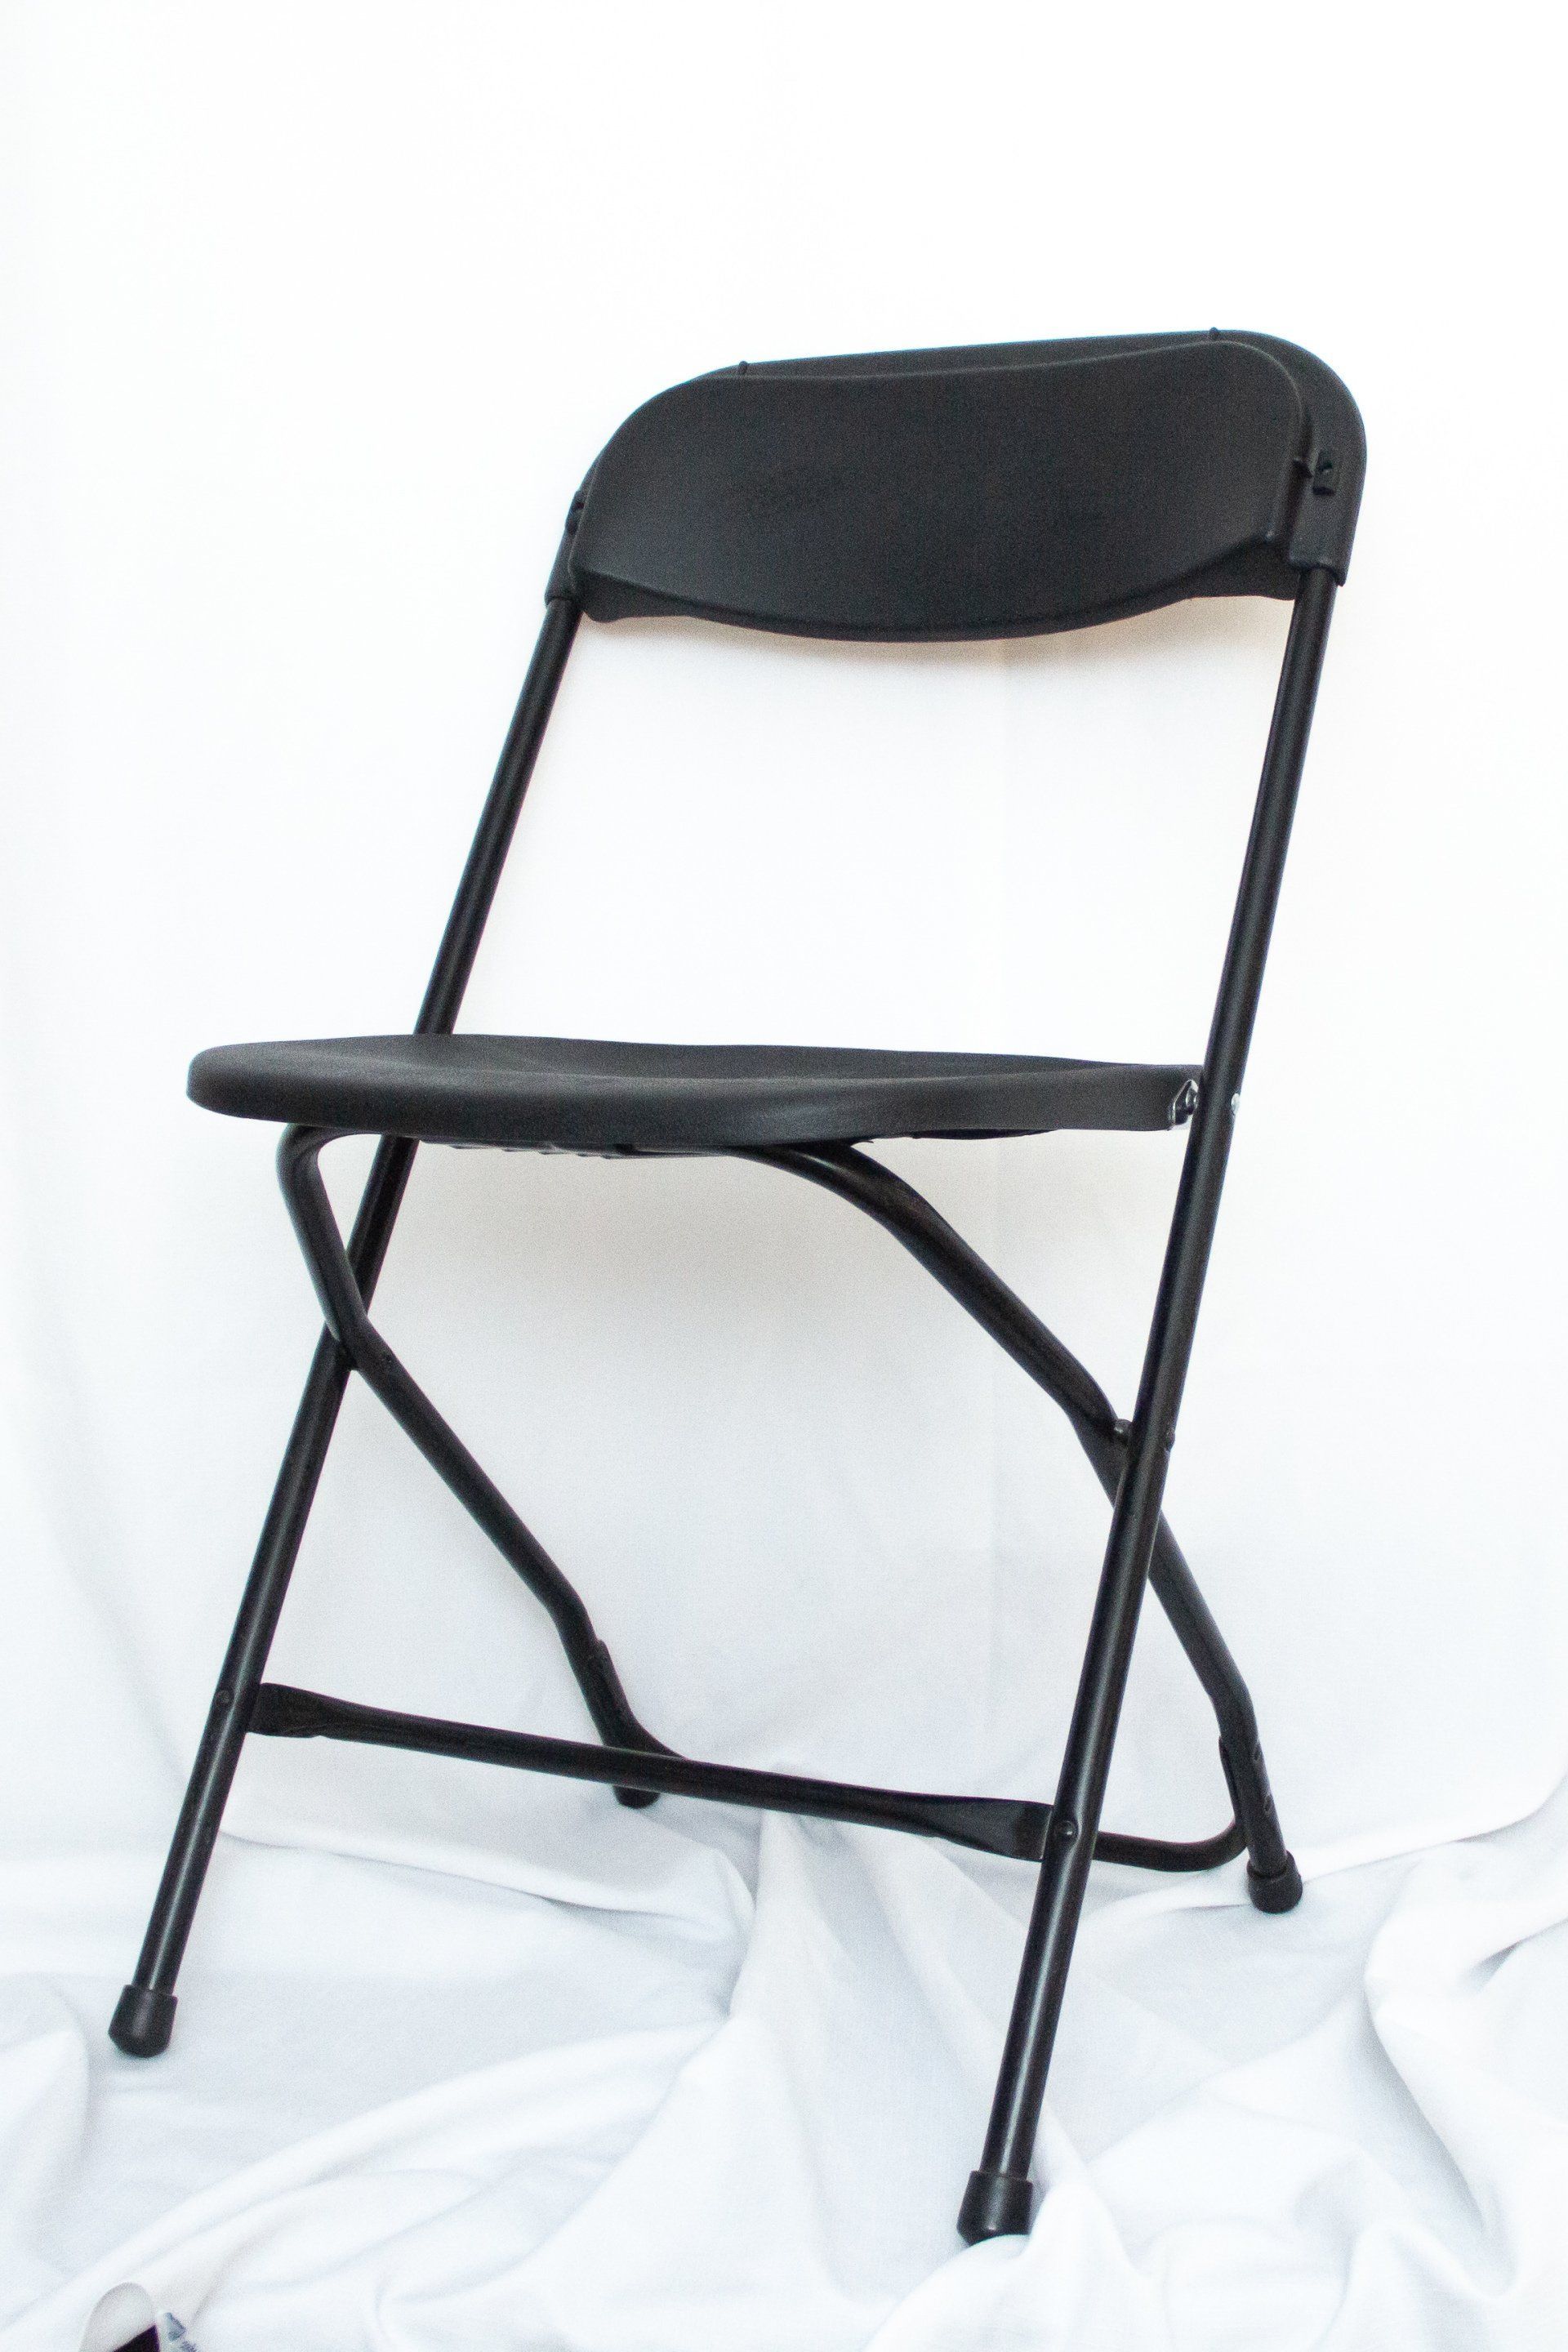 A black folding chair is sitting on a white cloth